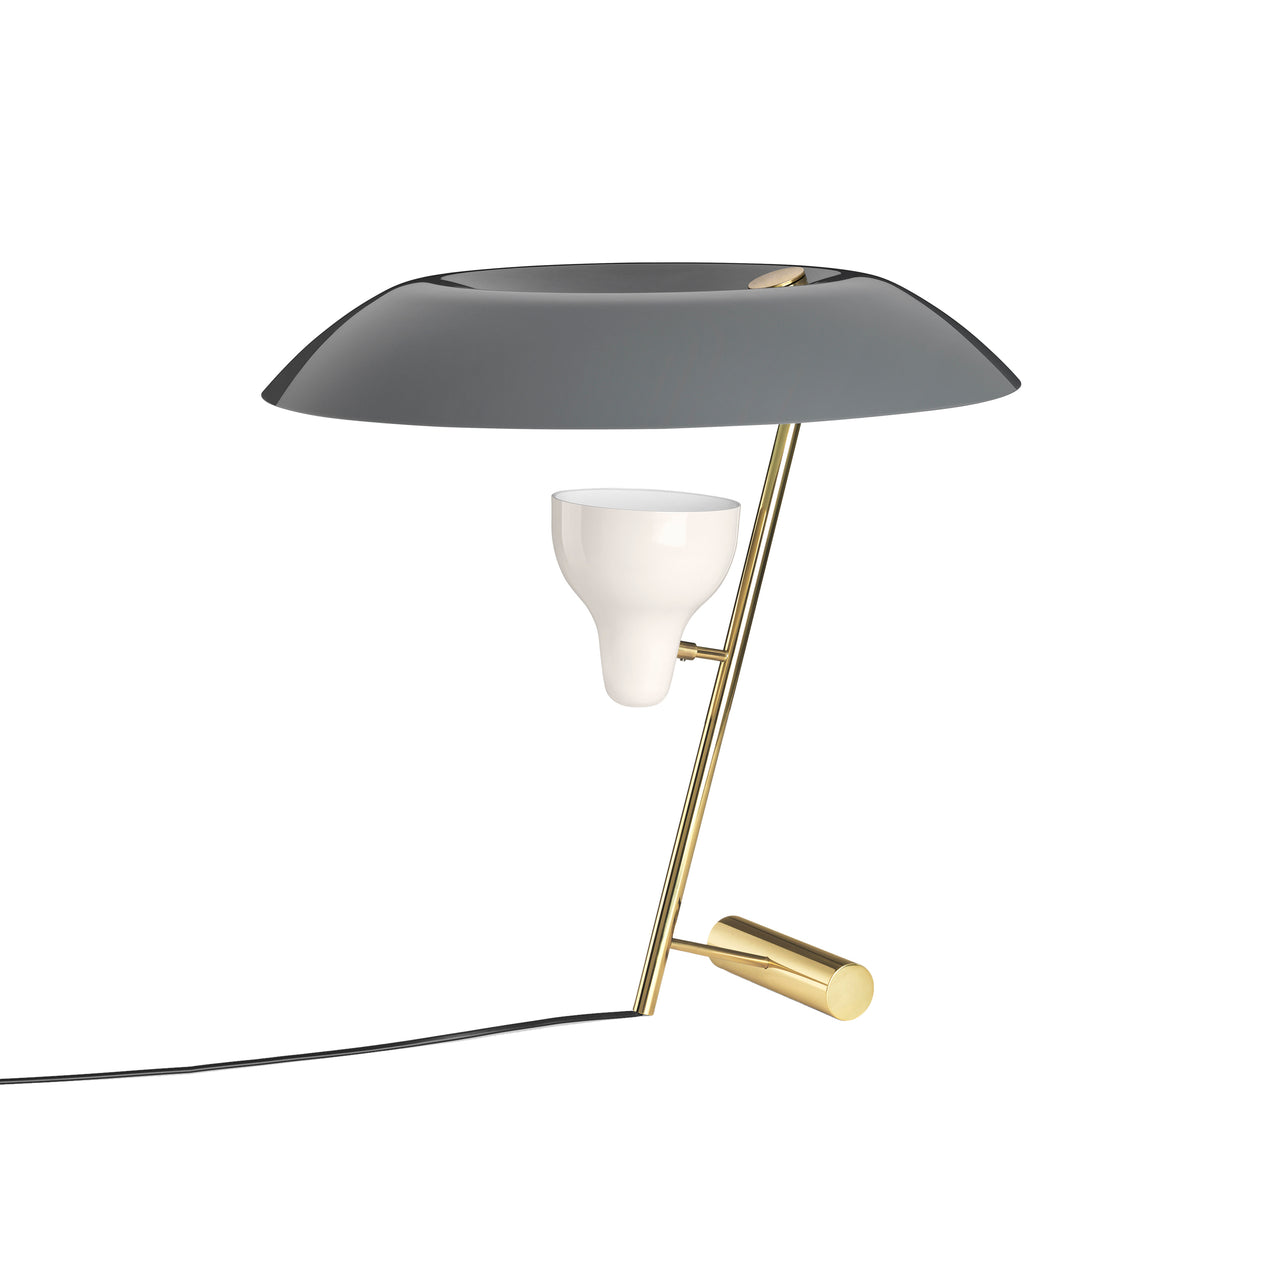 Model 548 Table Lamp: Polished Brass + Grey